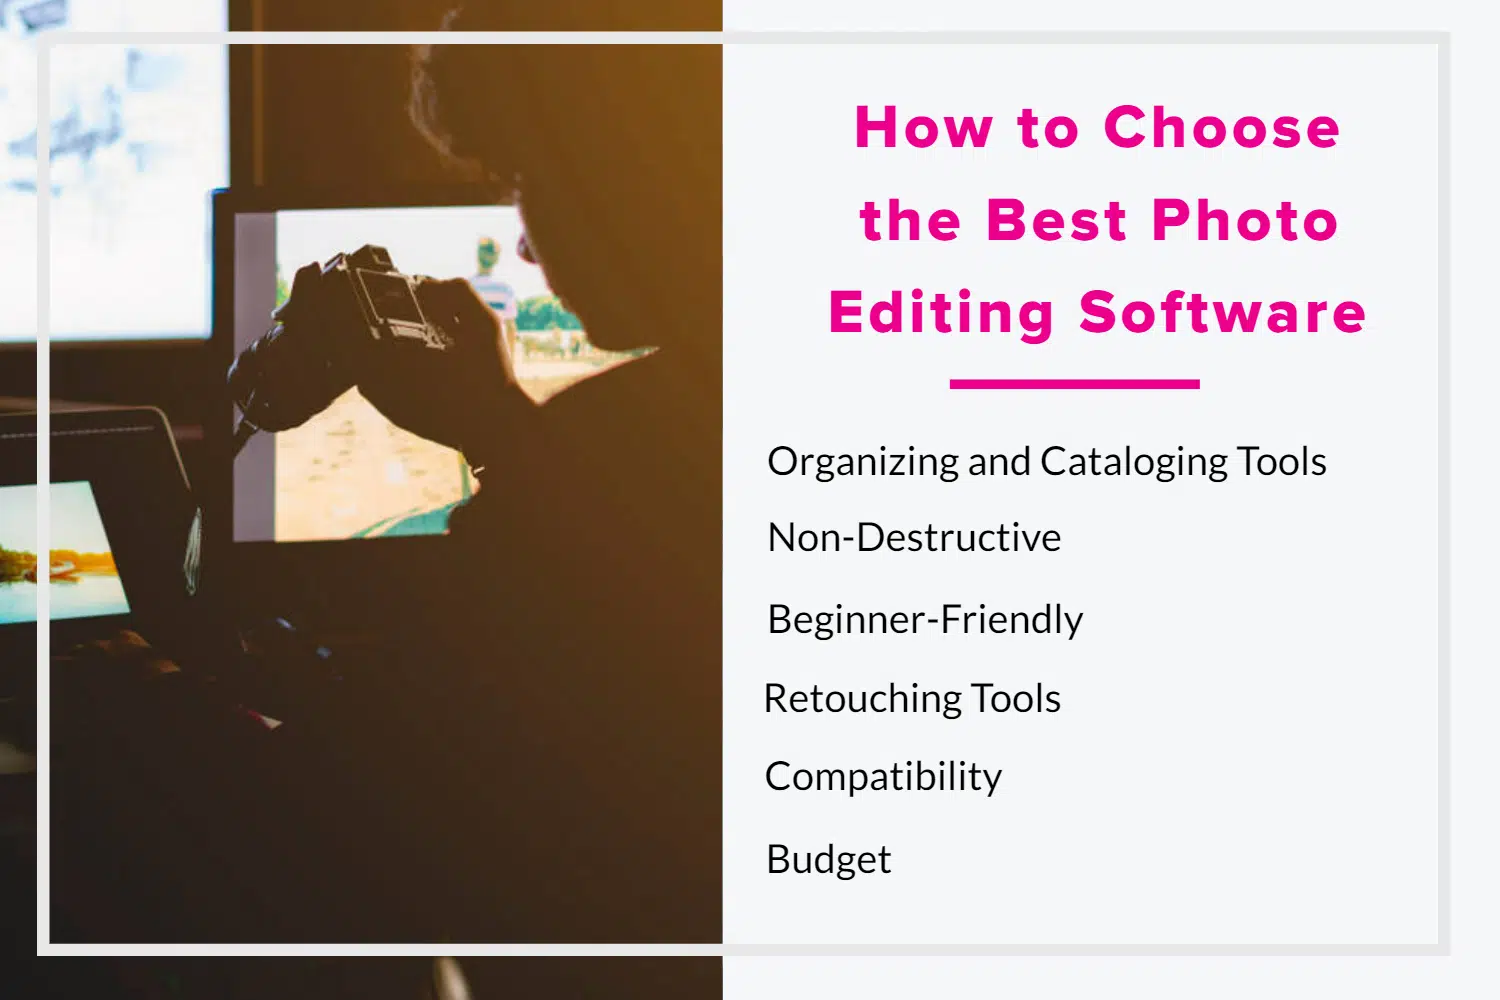 How to Choose the Best Photo Editing Software